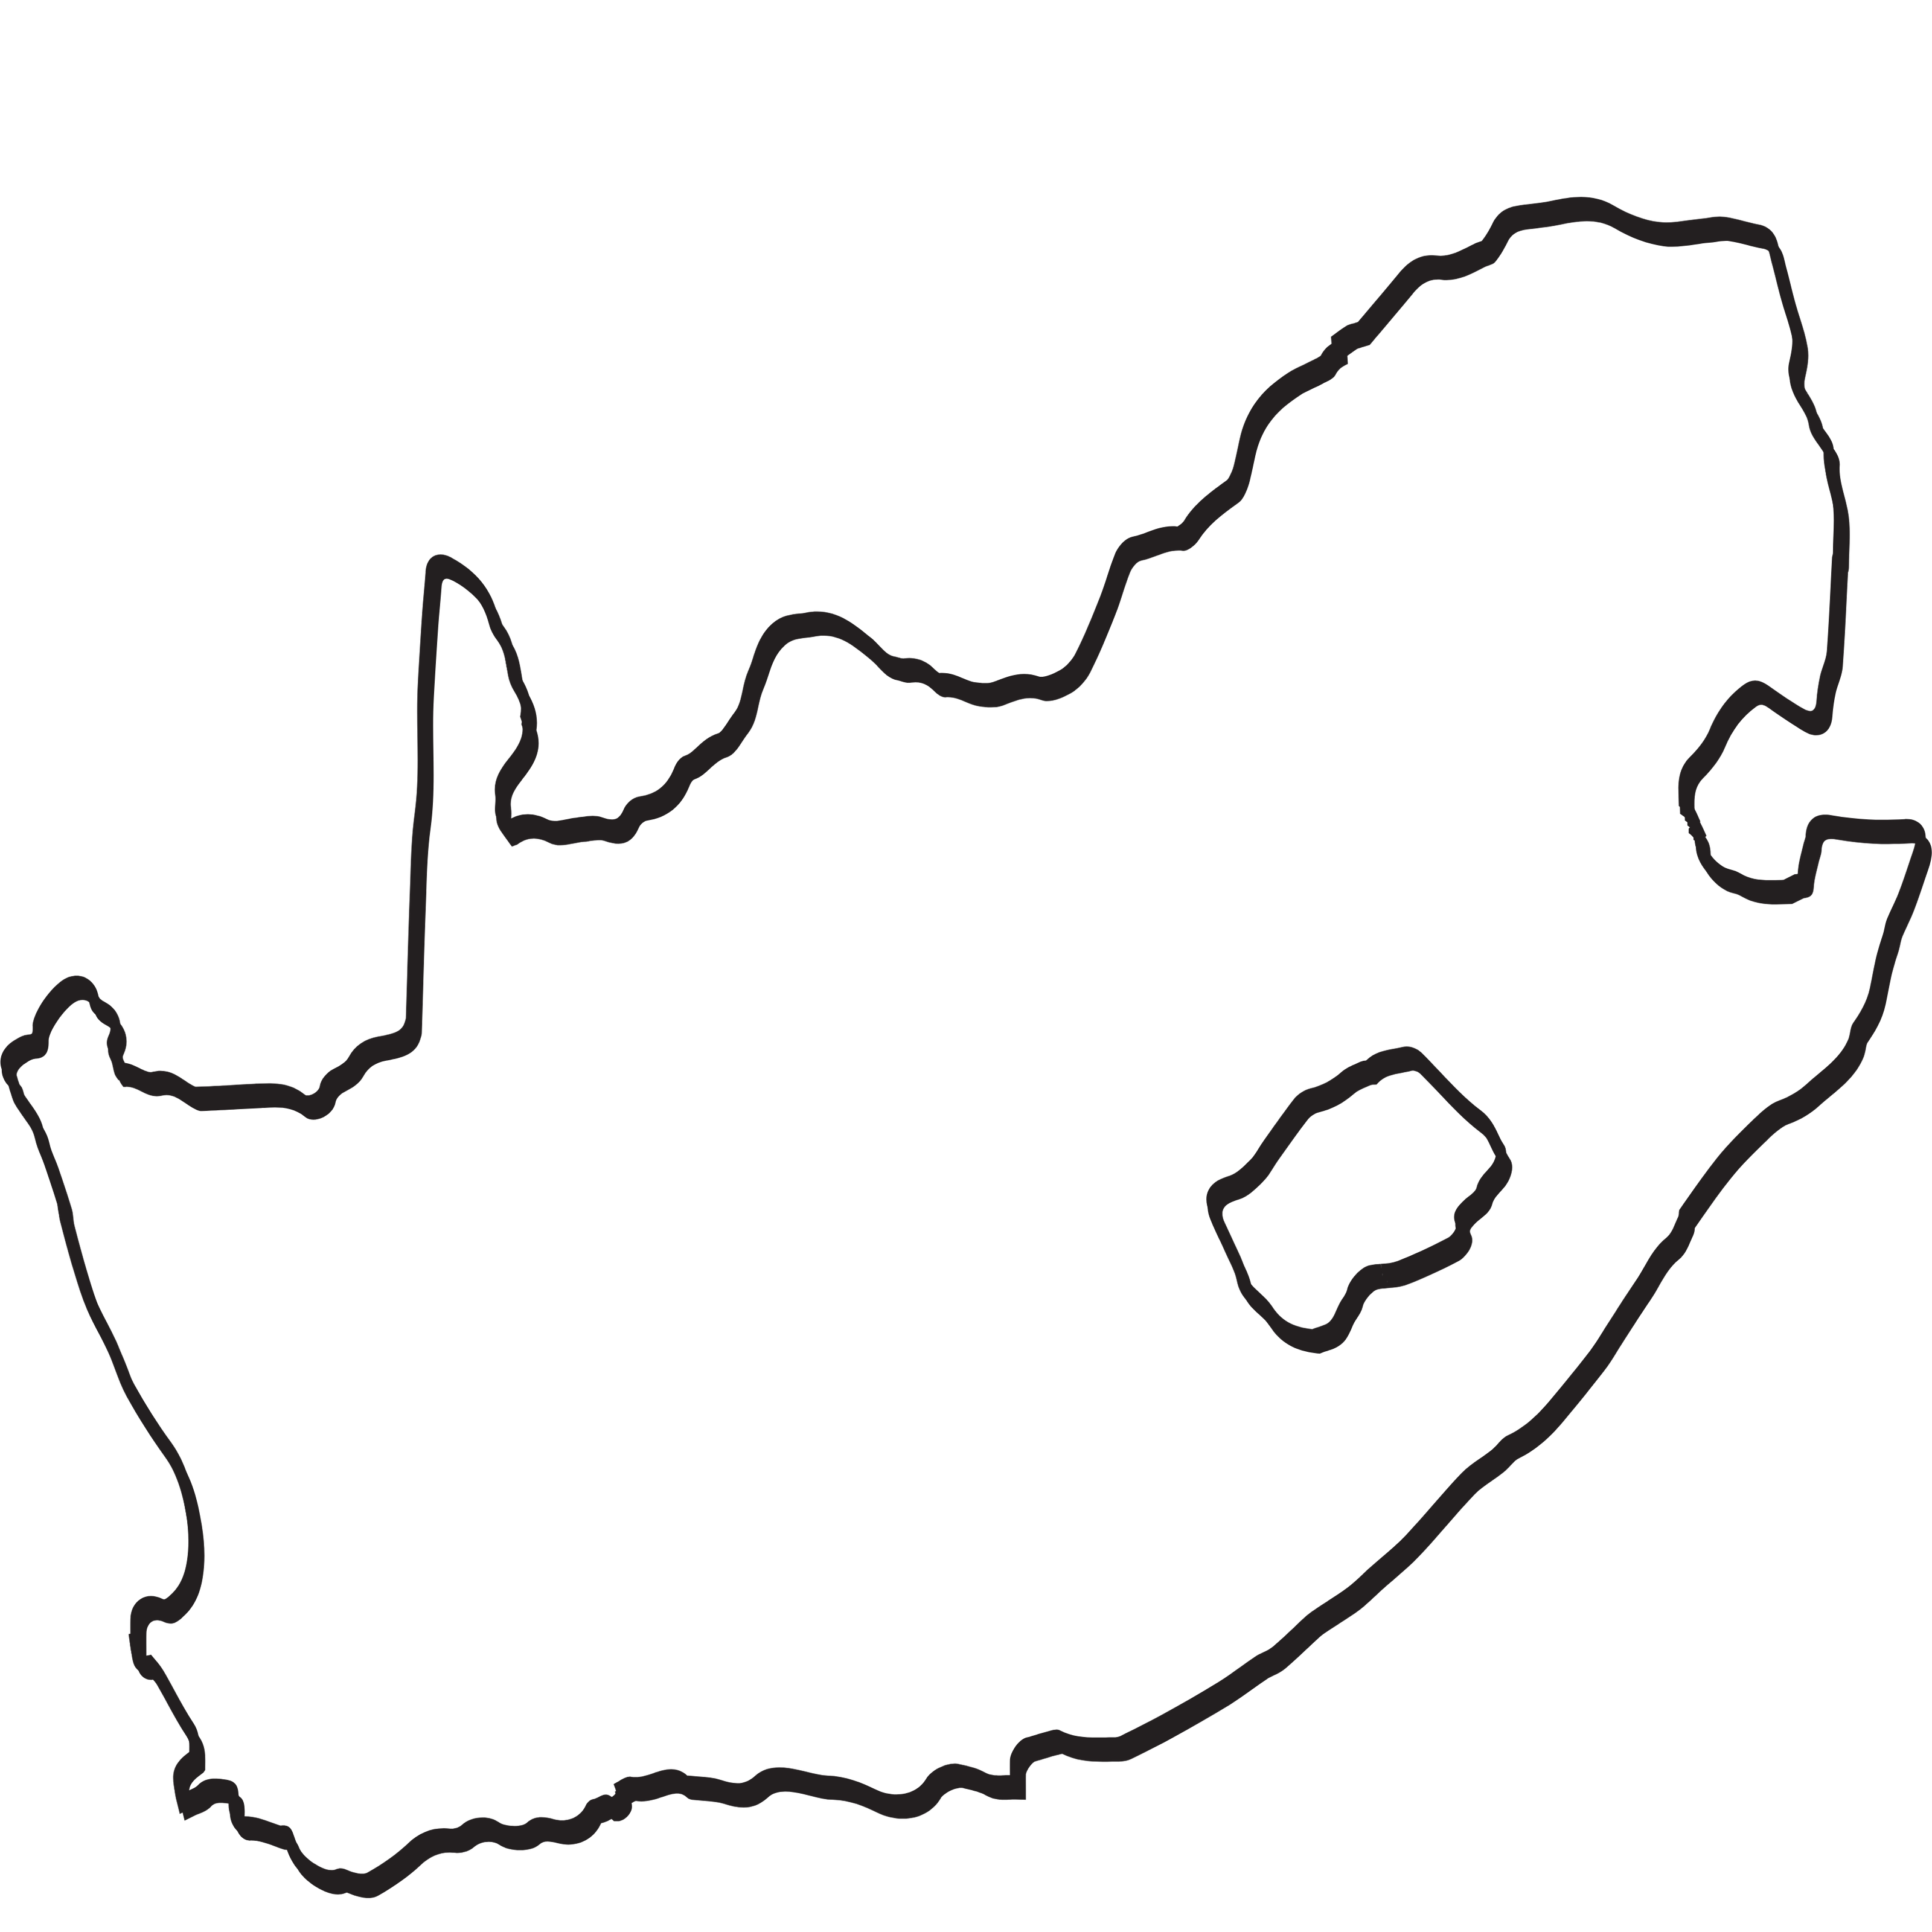 Map outline of South Africa